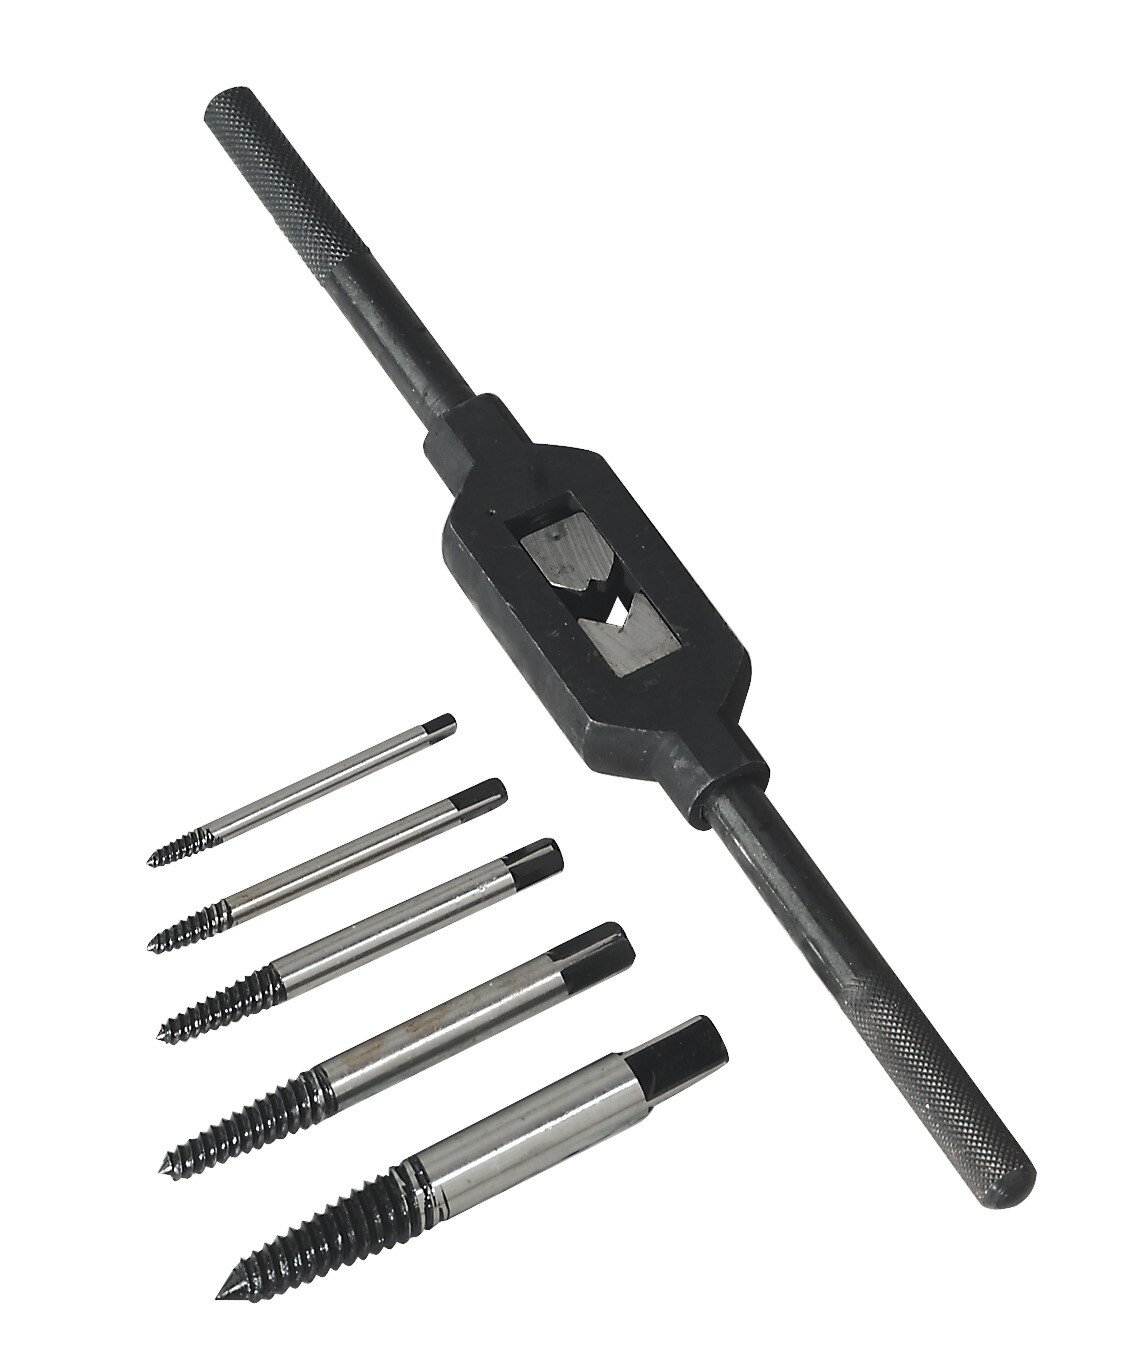 Sealey AK721 Screw Extractor Set with Wrench 6 Piece Helix Type